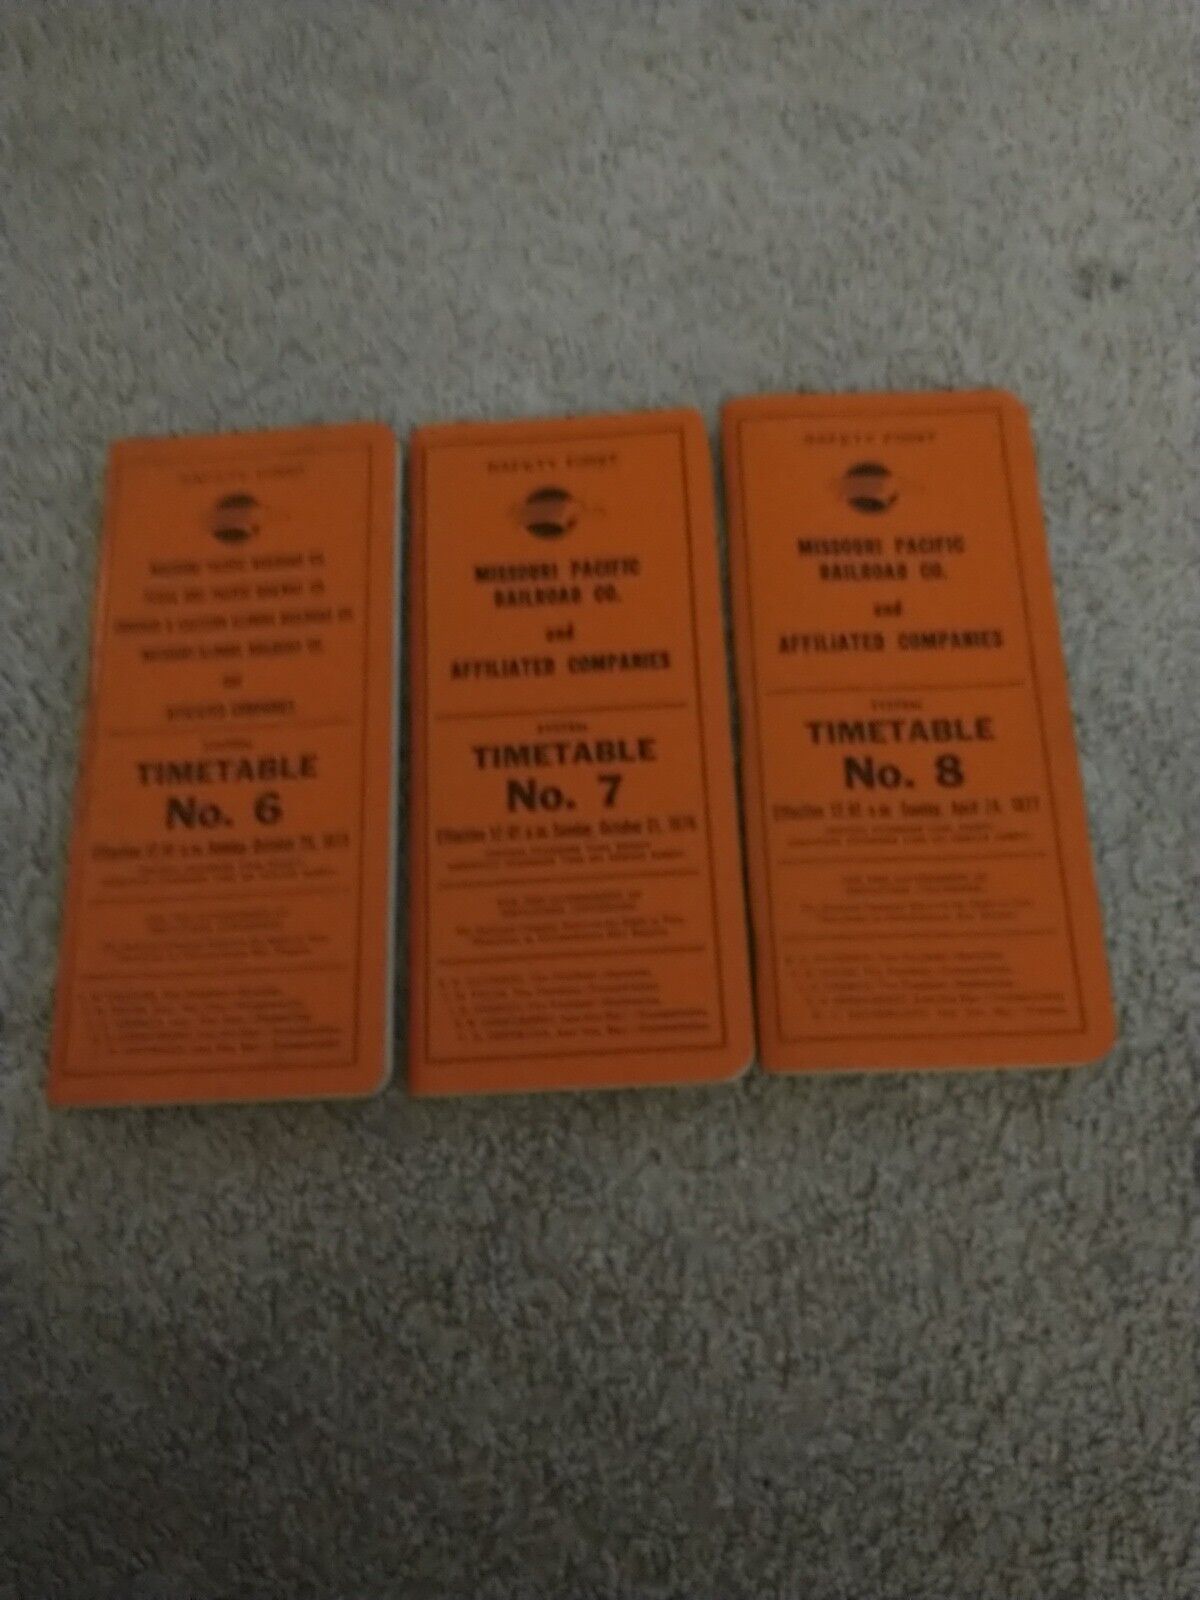 18 Missouri Pacific Employee Timetables - system 1975 to 1984